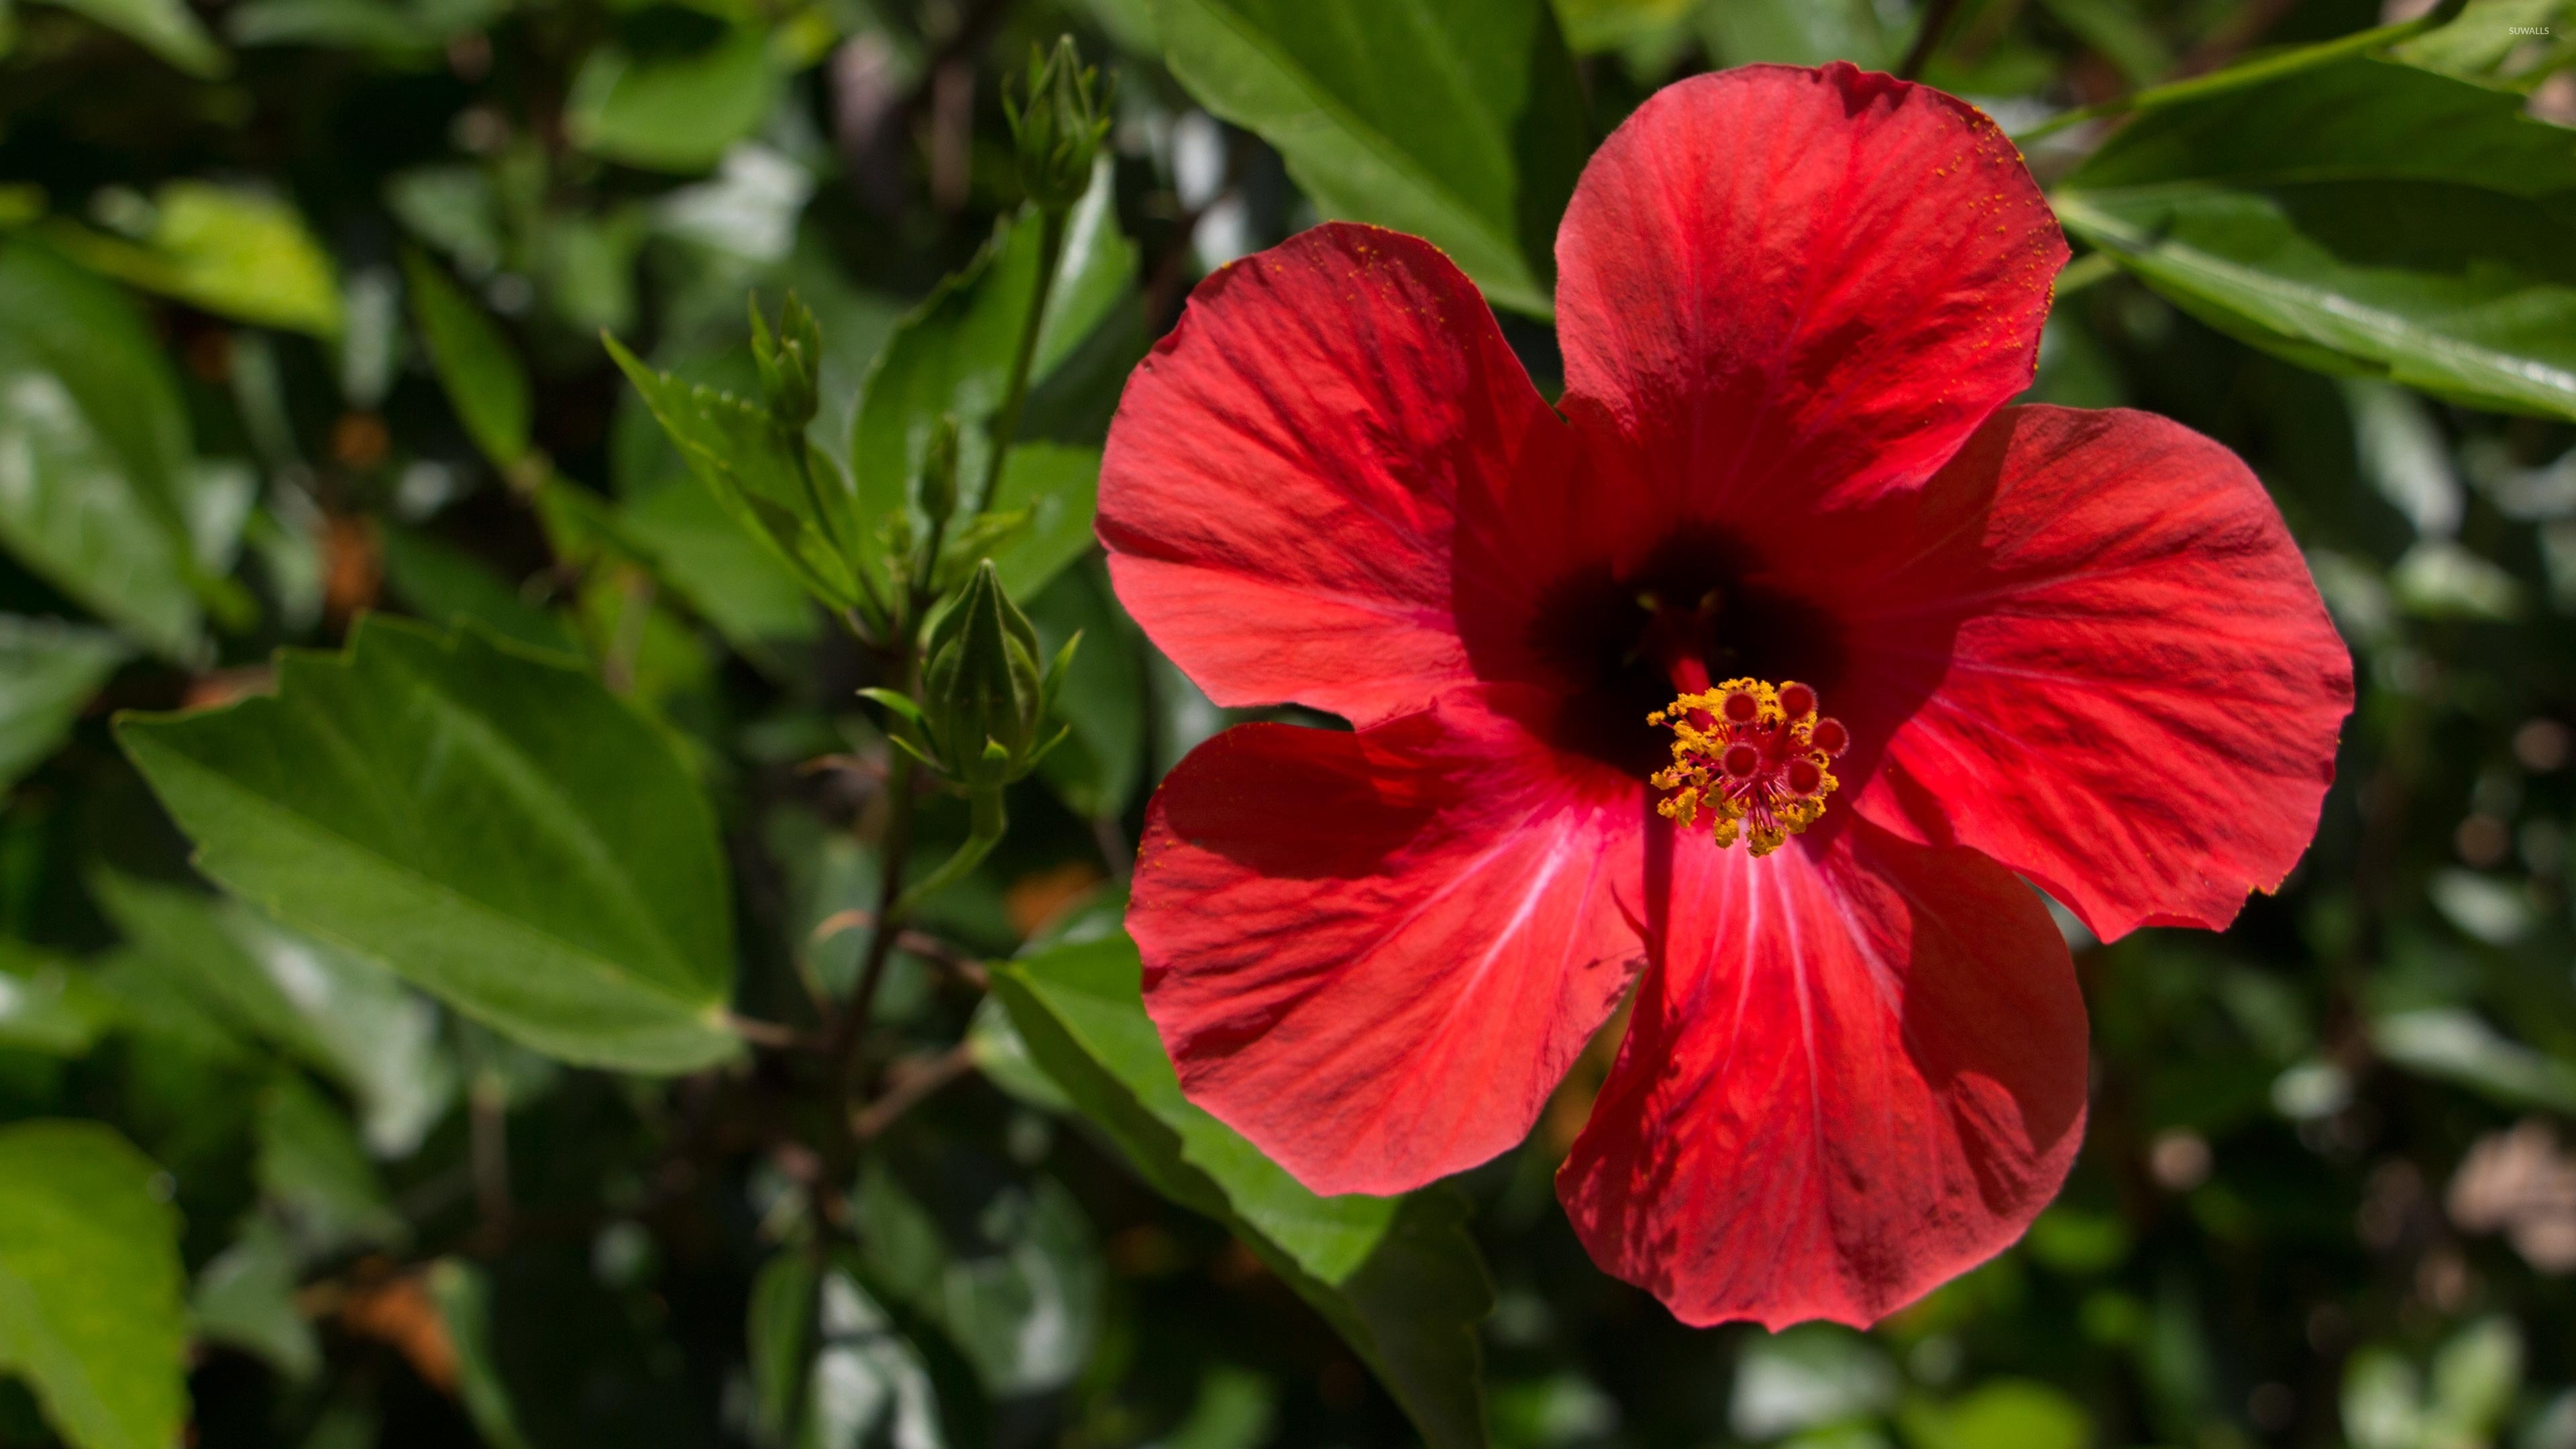 Red hibiscus blossom, Afternoon sun beauty, Stunning floral wallpaper, Nature's delight, 3840x2160 4K Desktop